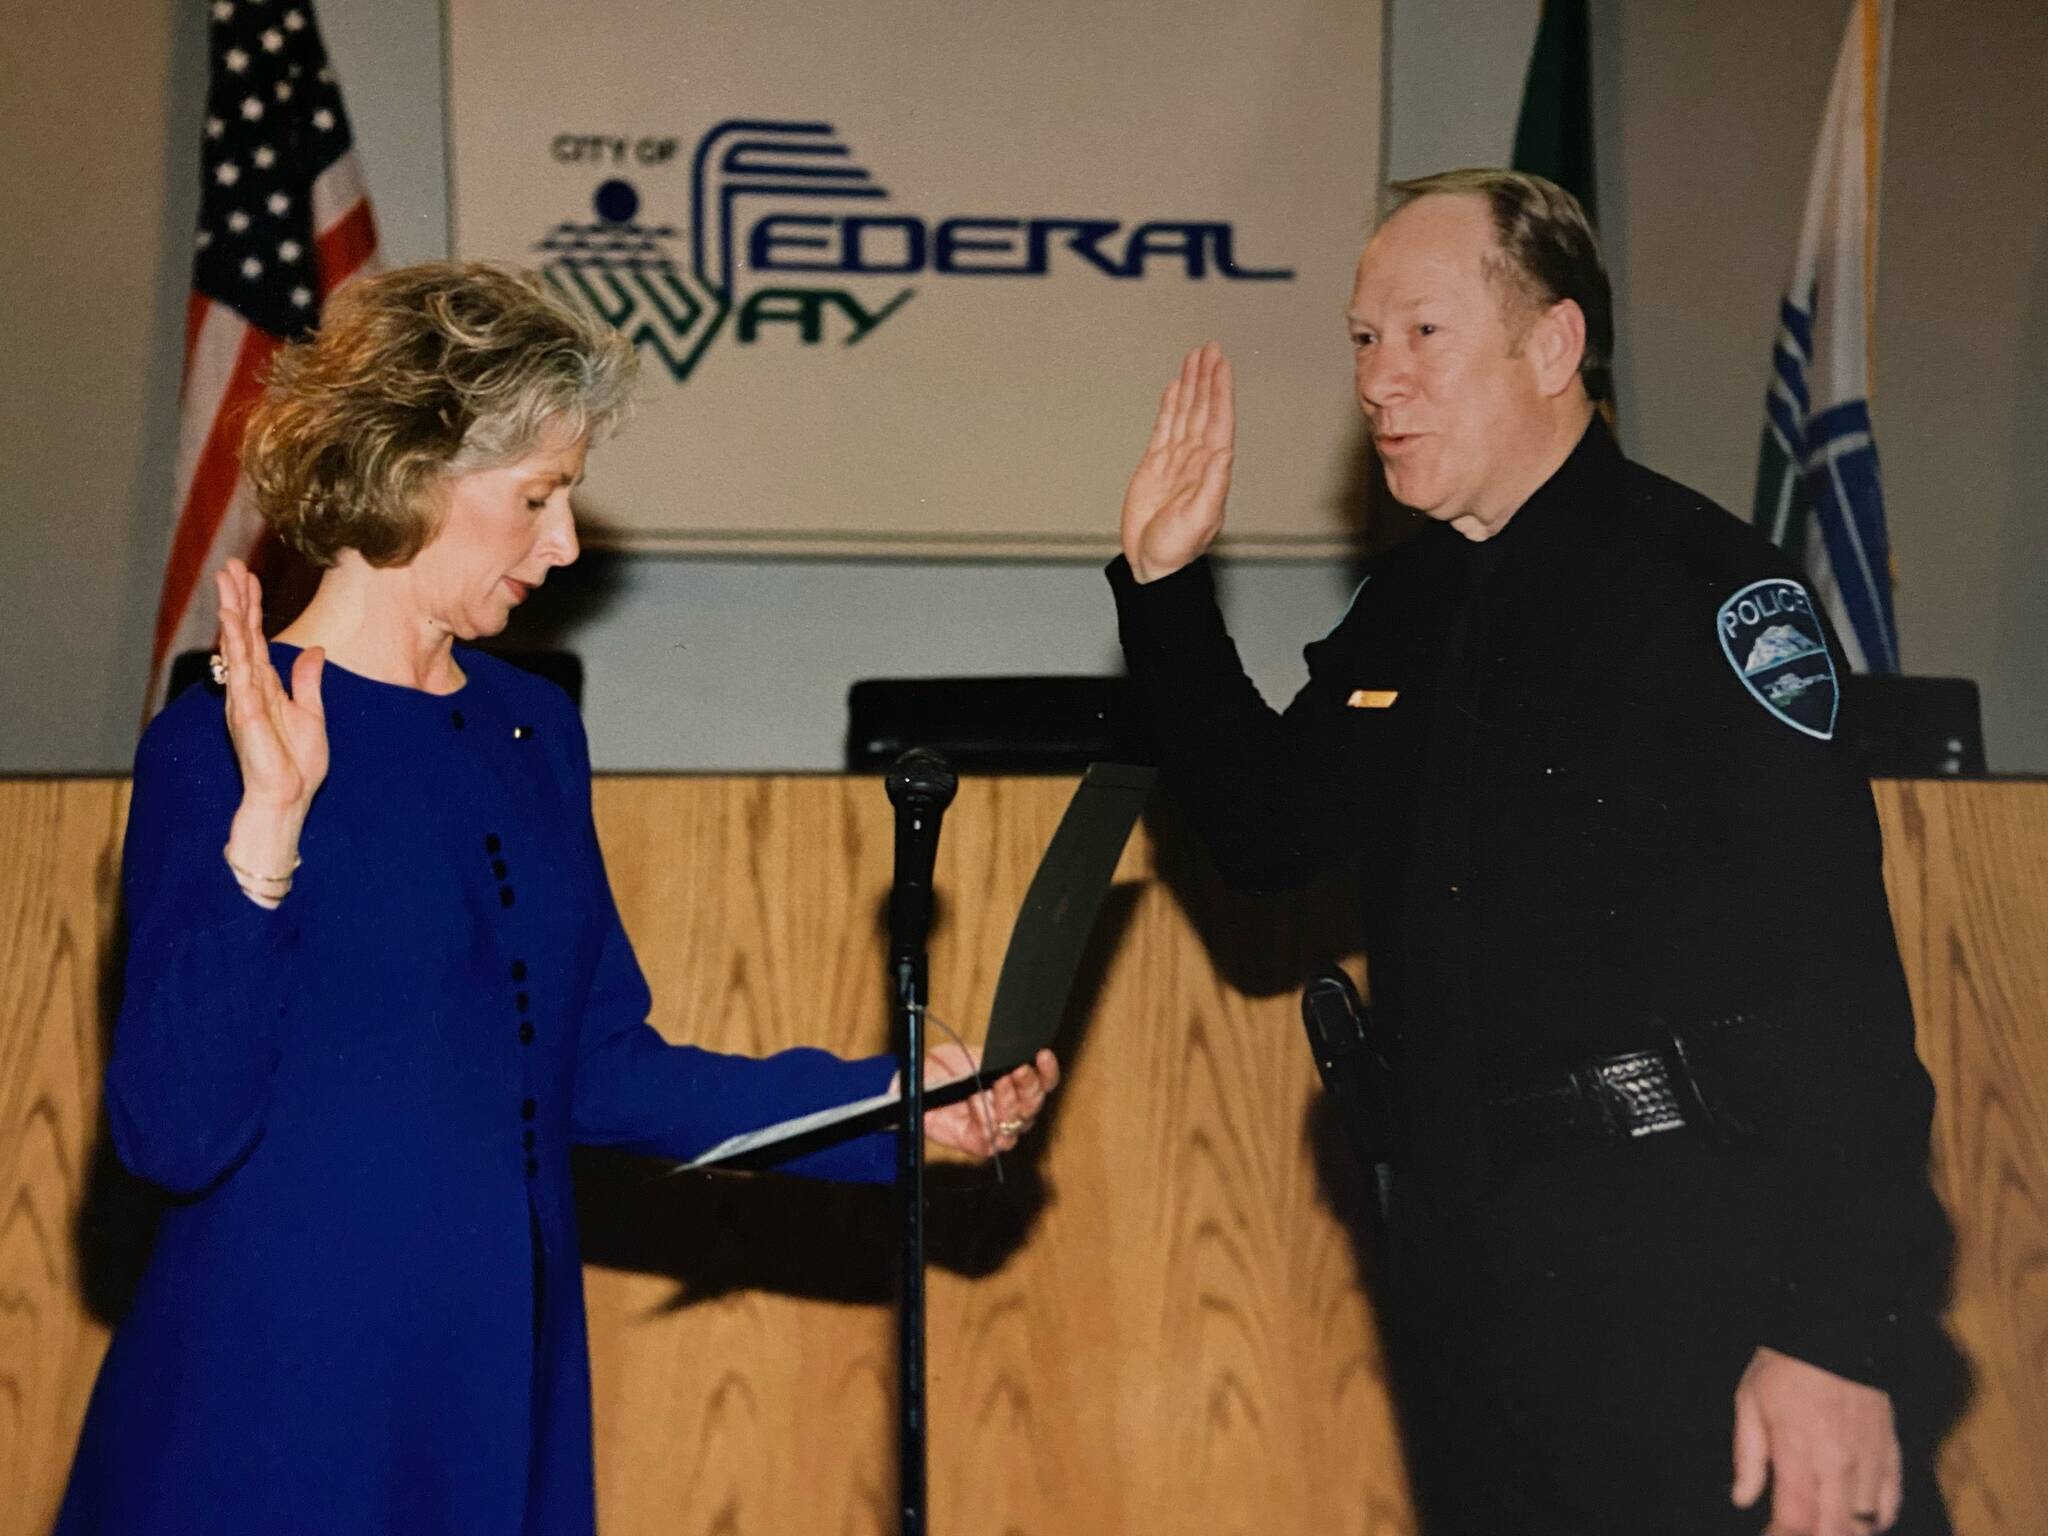 Ronald Wood is sworn in as police chief in 1996. Photo courtesy of Lisa Wood